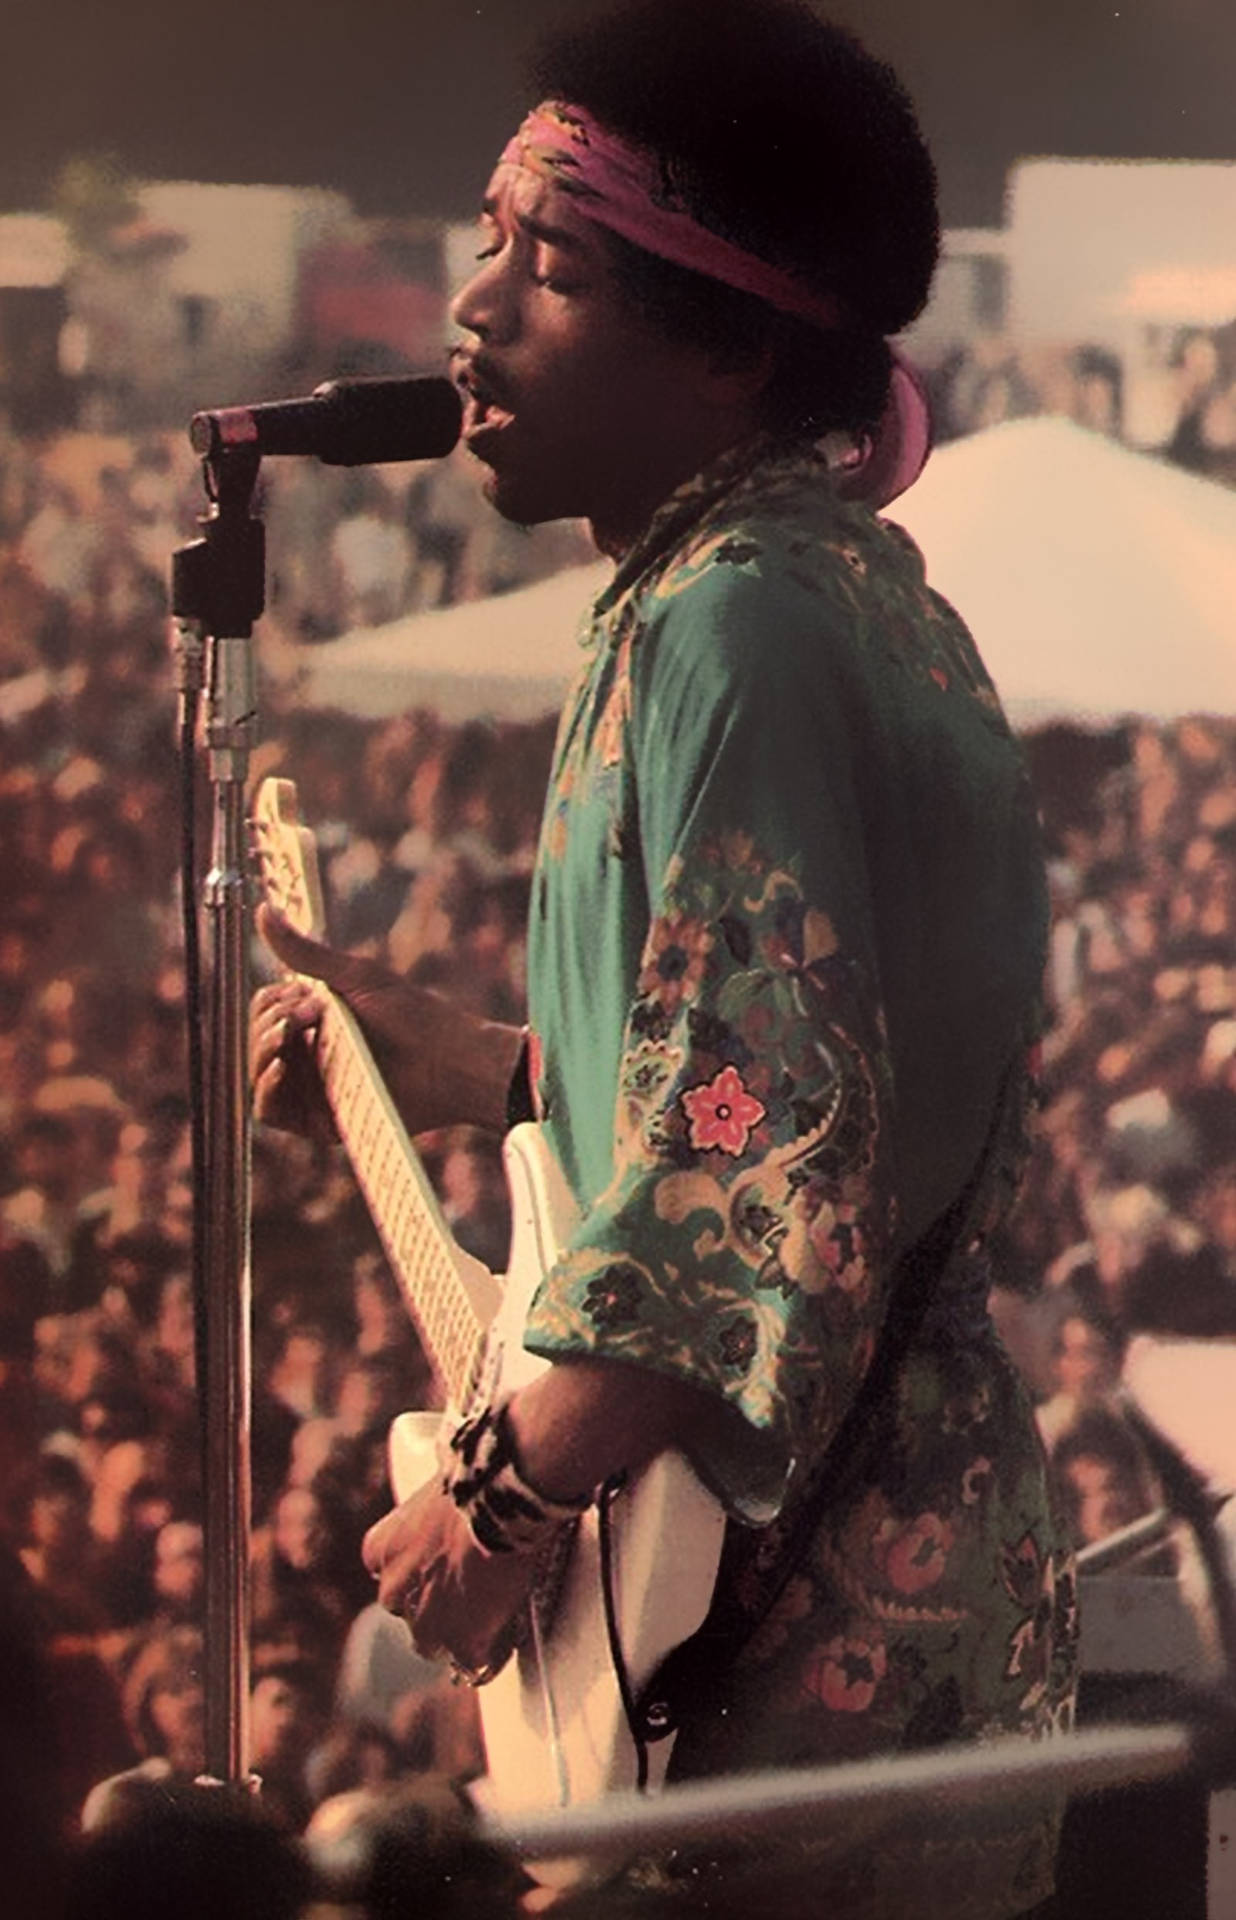 Jimi Hendrix Playing In Front Large Crowd Background